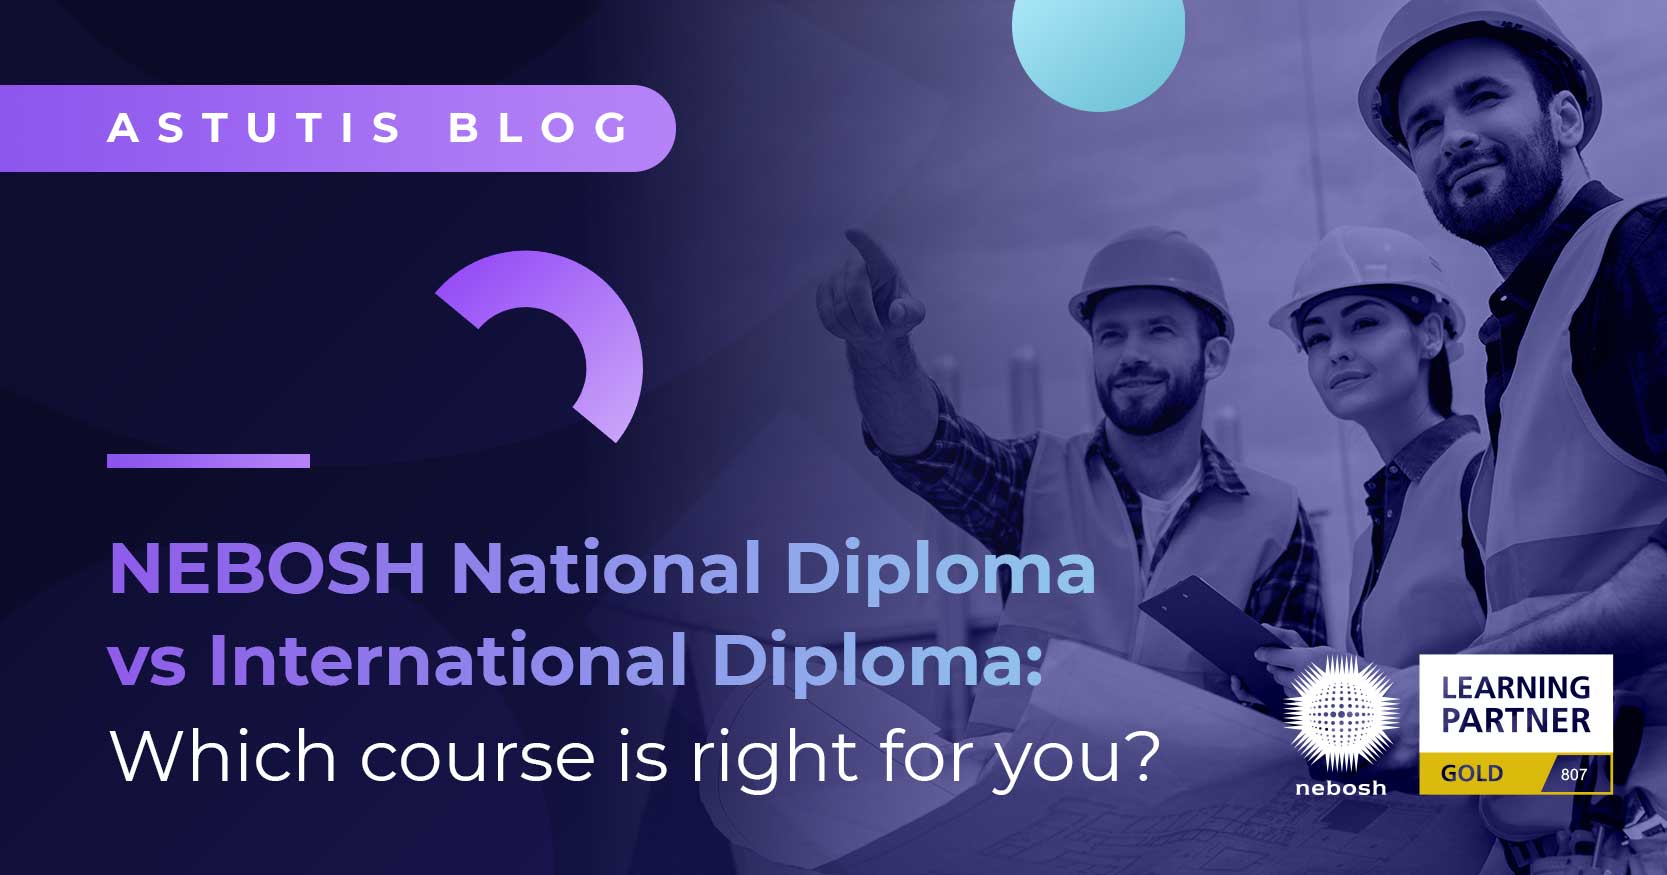 NEBOSH National Diploma vs International Diploma: Which course is right for you? Image